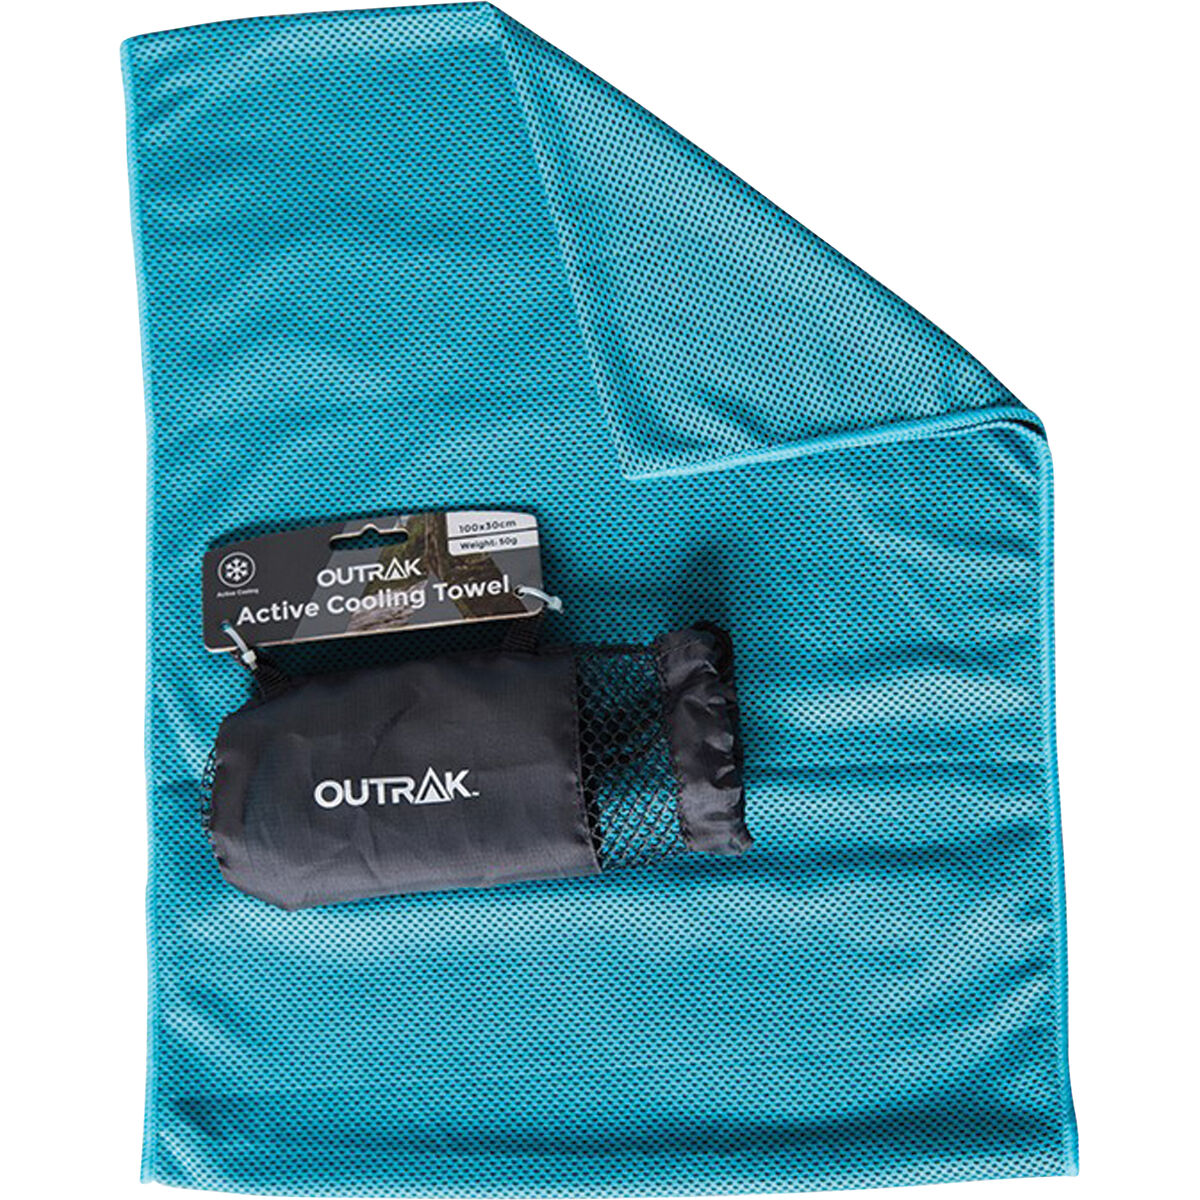 Outrak Active Cooling Towel | BCF